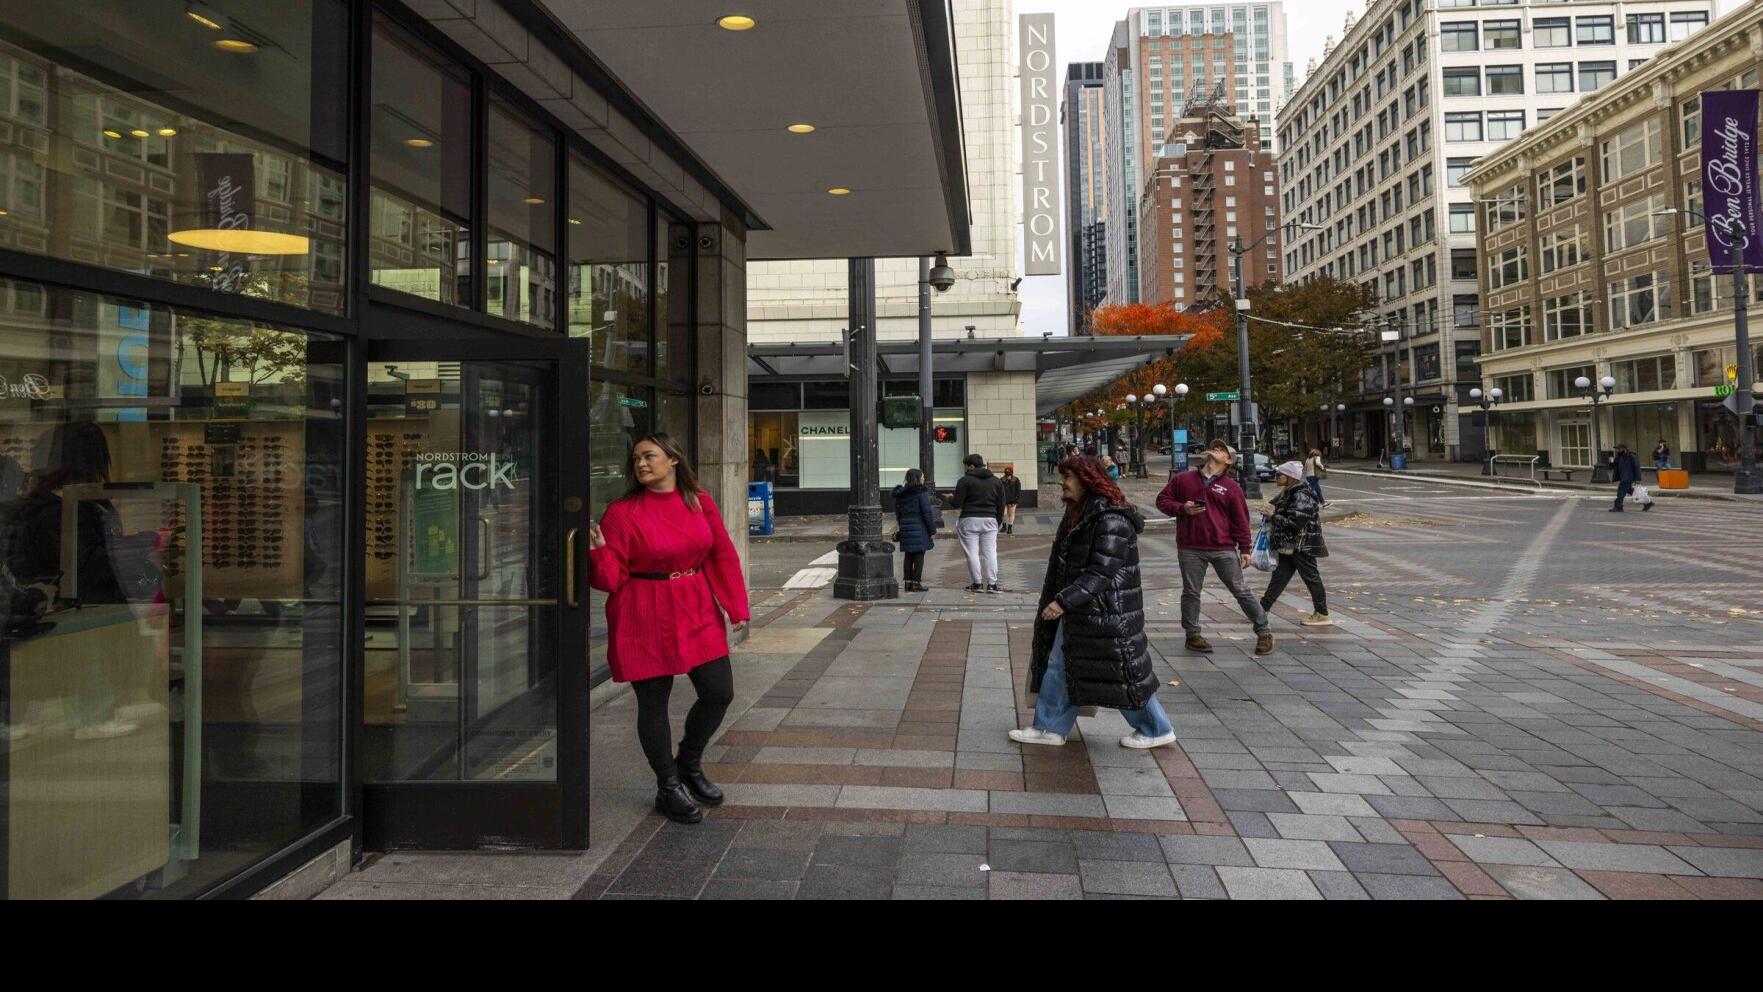 Nordstrom's Seattle flagship store stands the test of time, city